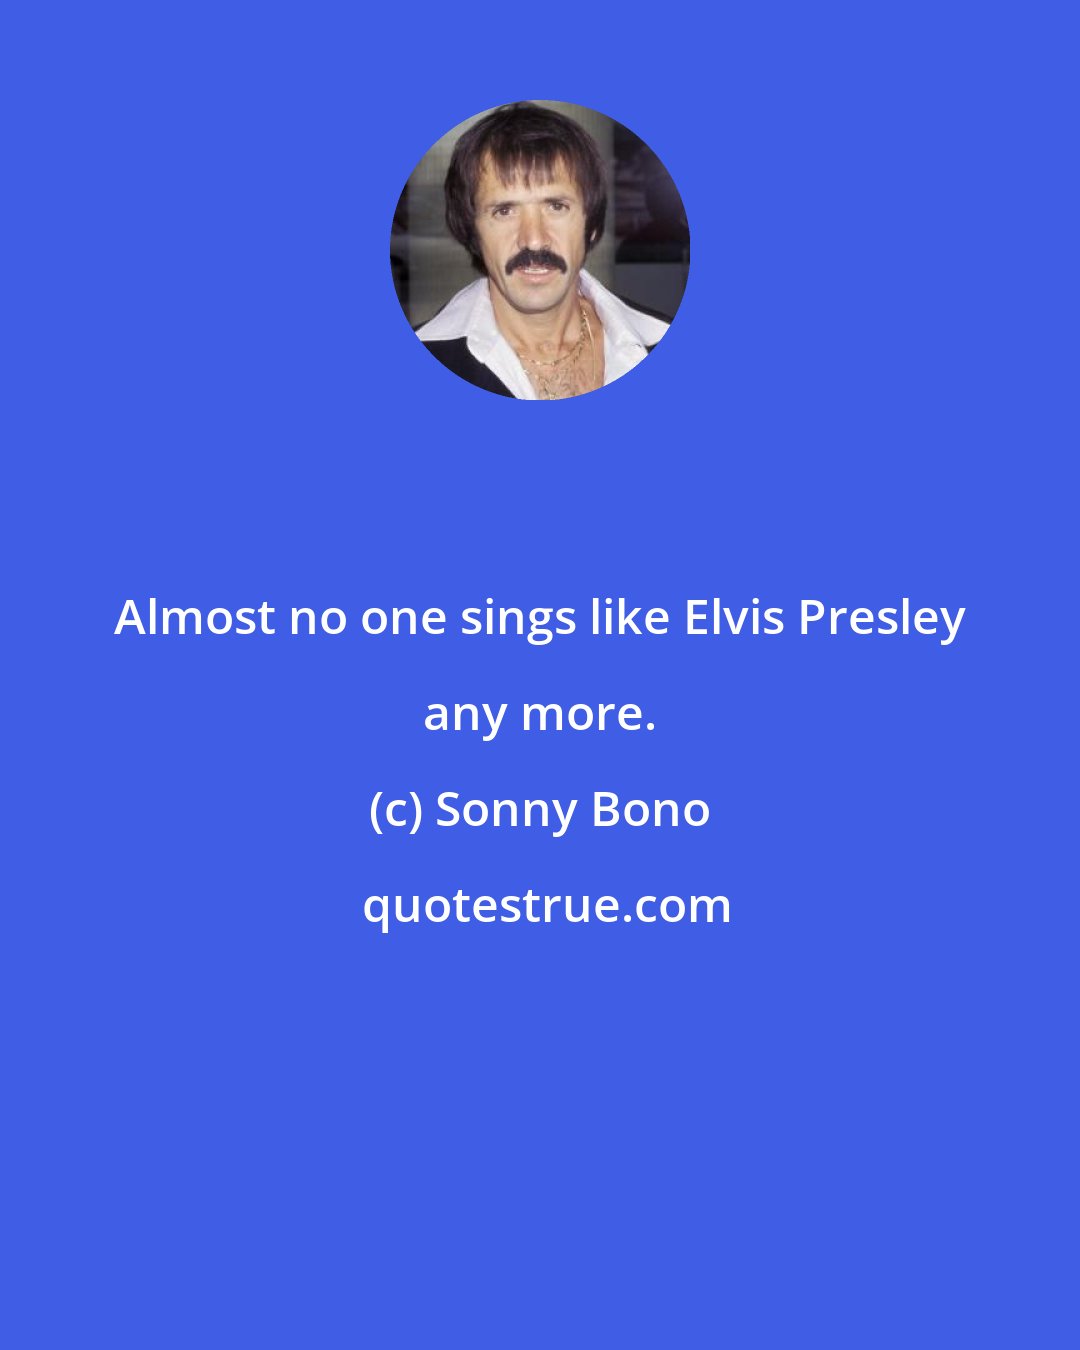 Sonny Bono: Almost no one sings like Elvis Presley any more.